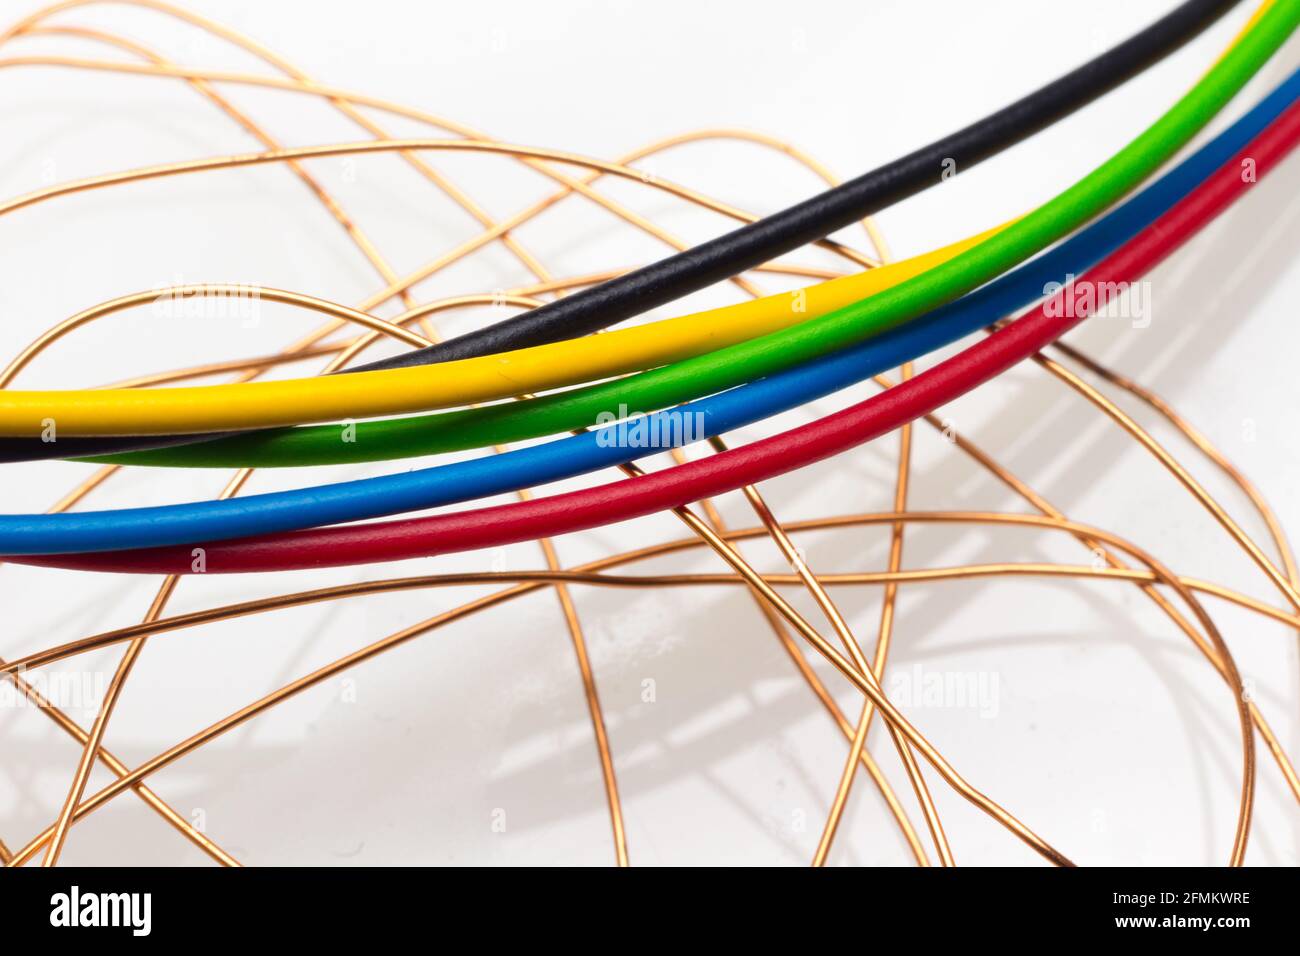 Bundle Thin Electronics Cables Isolated On Stock Photo 289883294